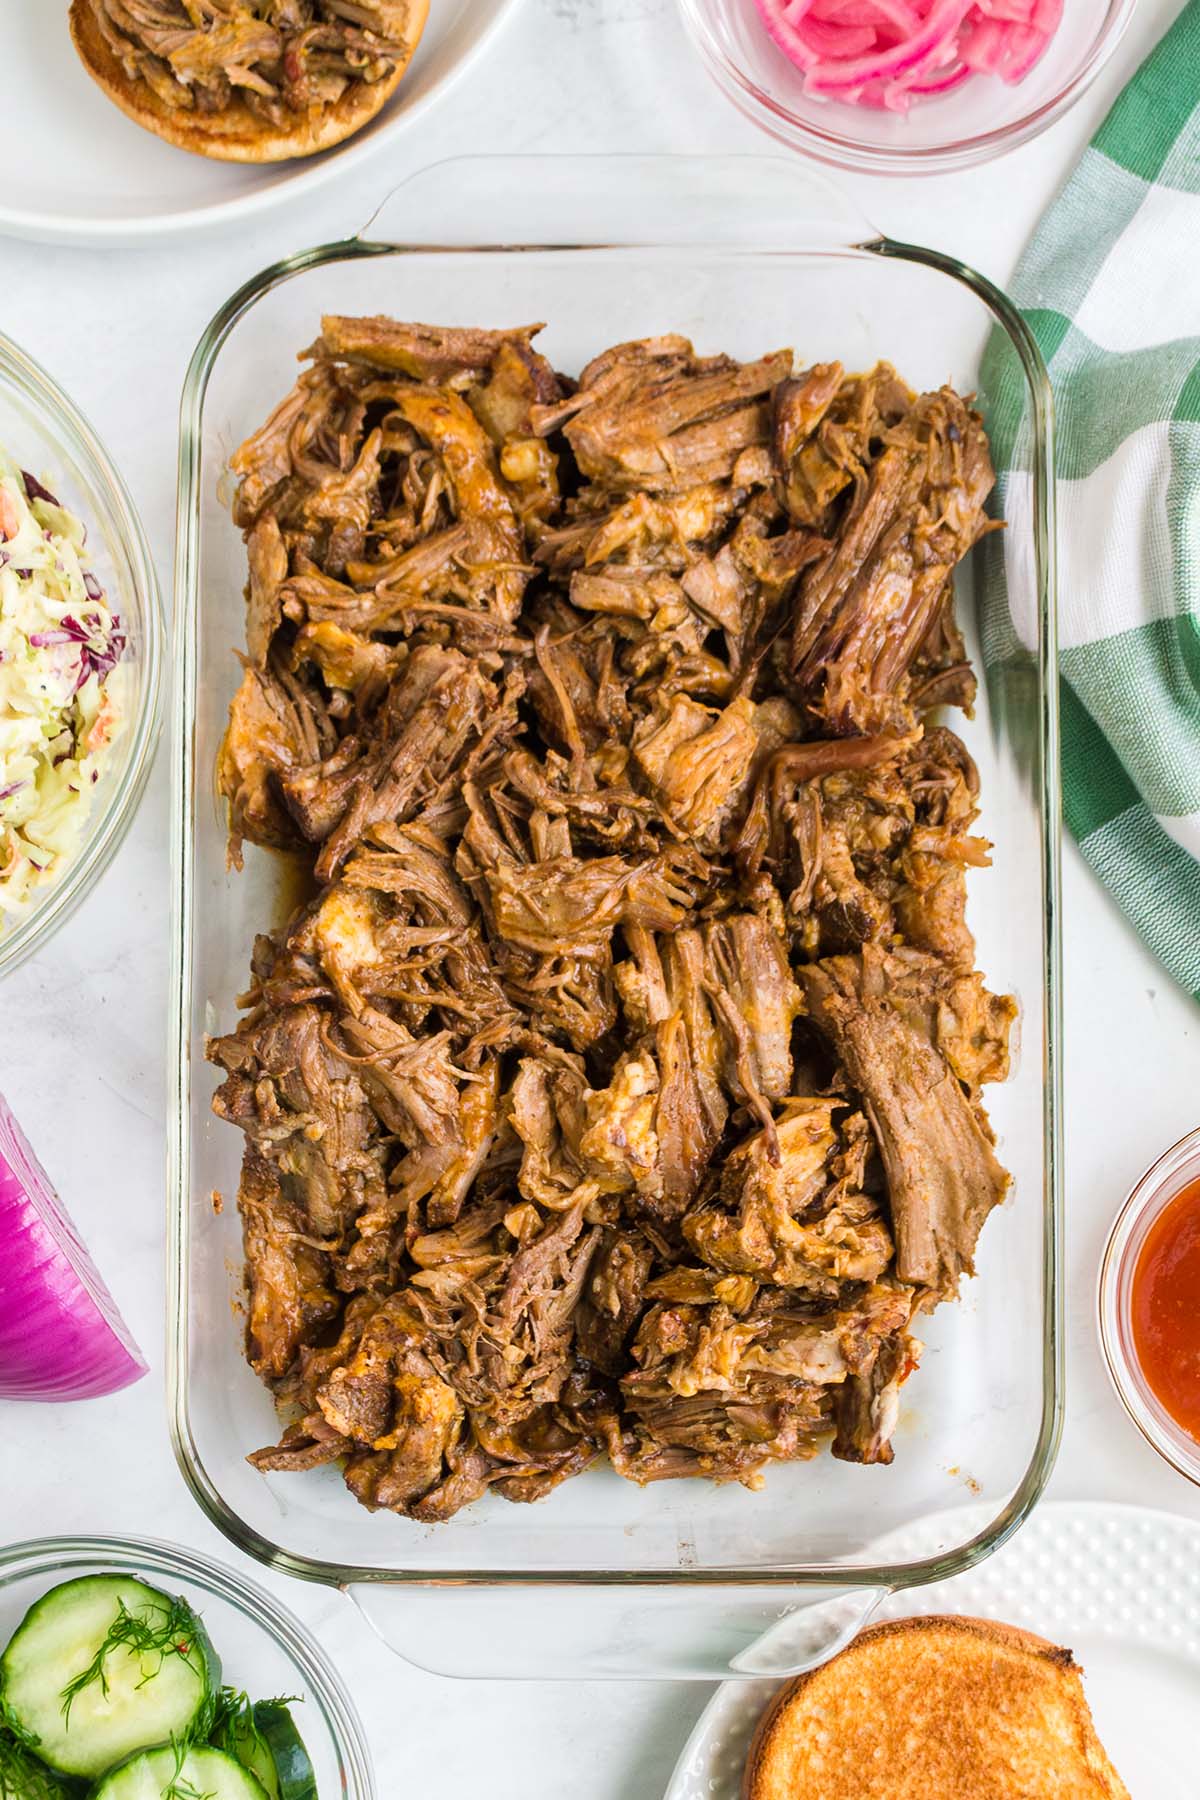 Pulled pork in a clear dish.